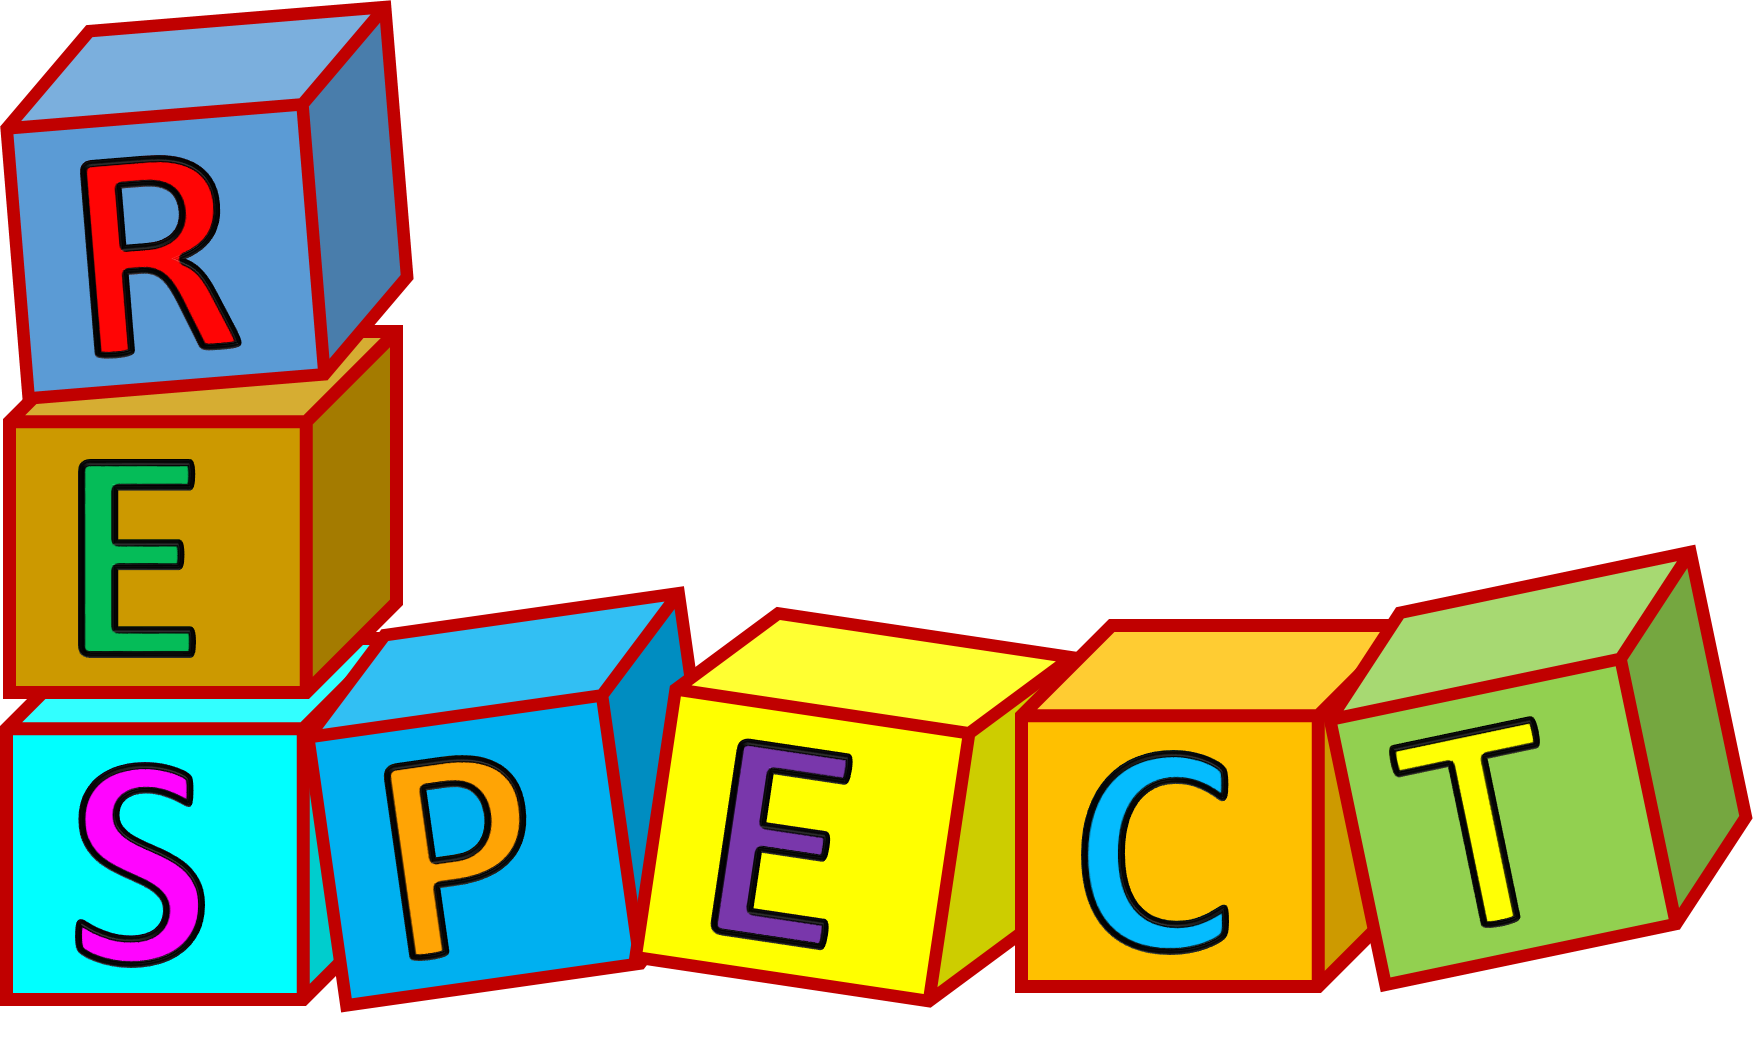 Https Openclipart Org Image 8 - Respect Clip Art